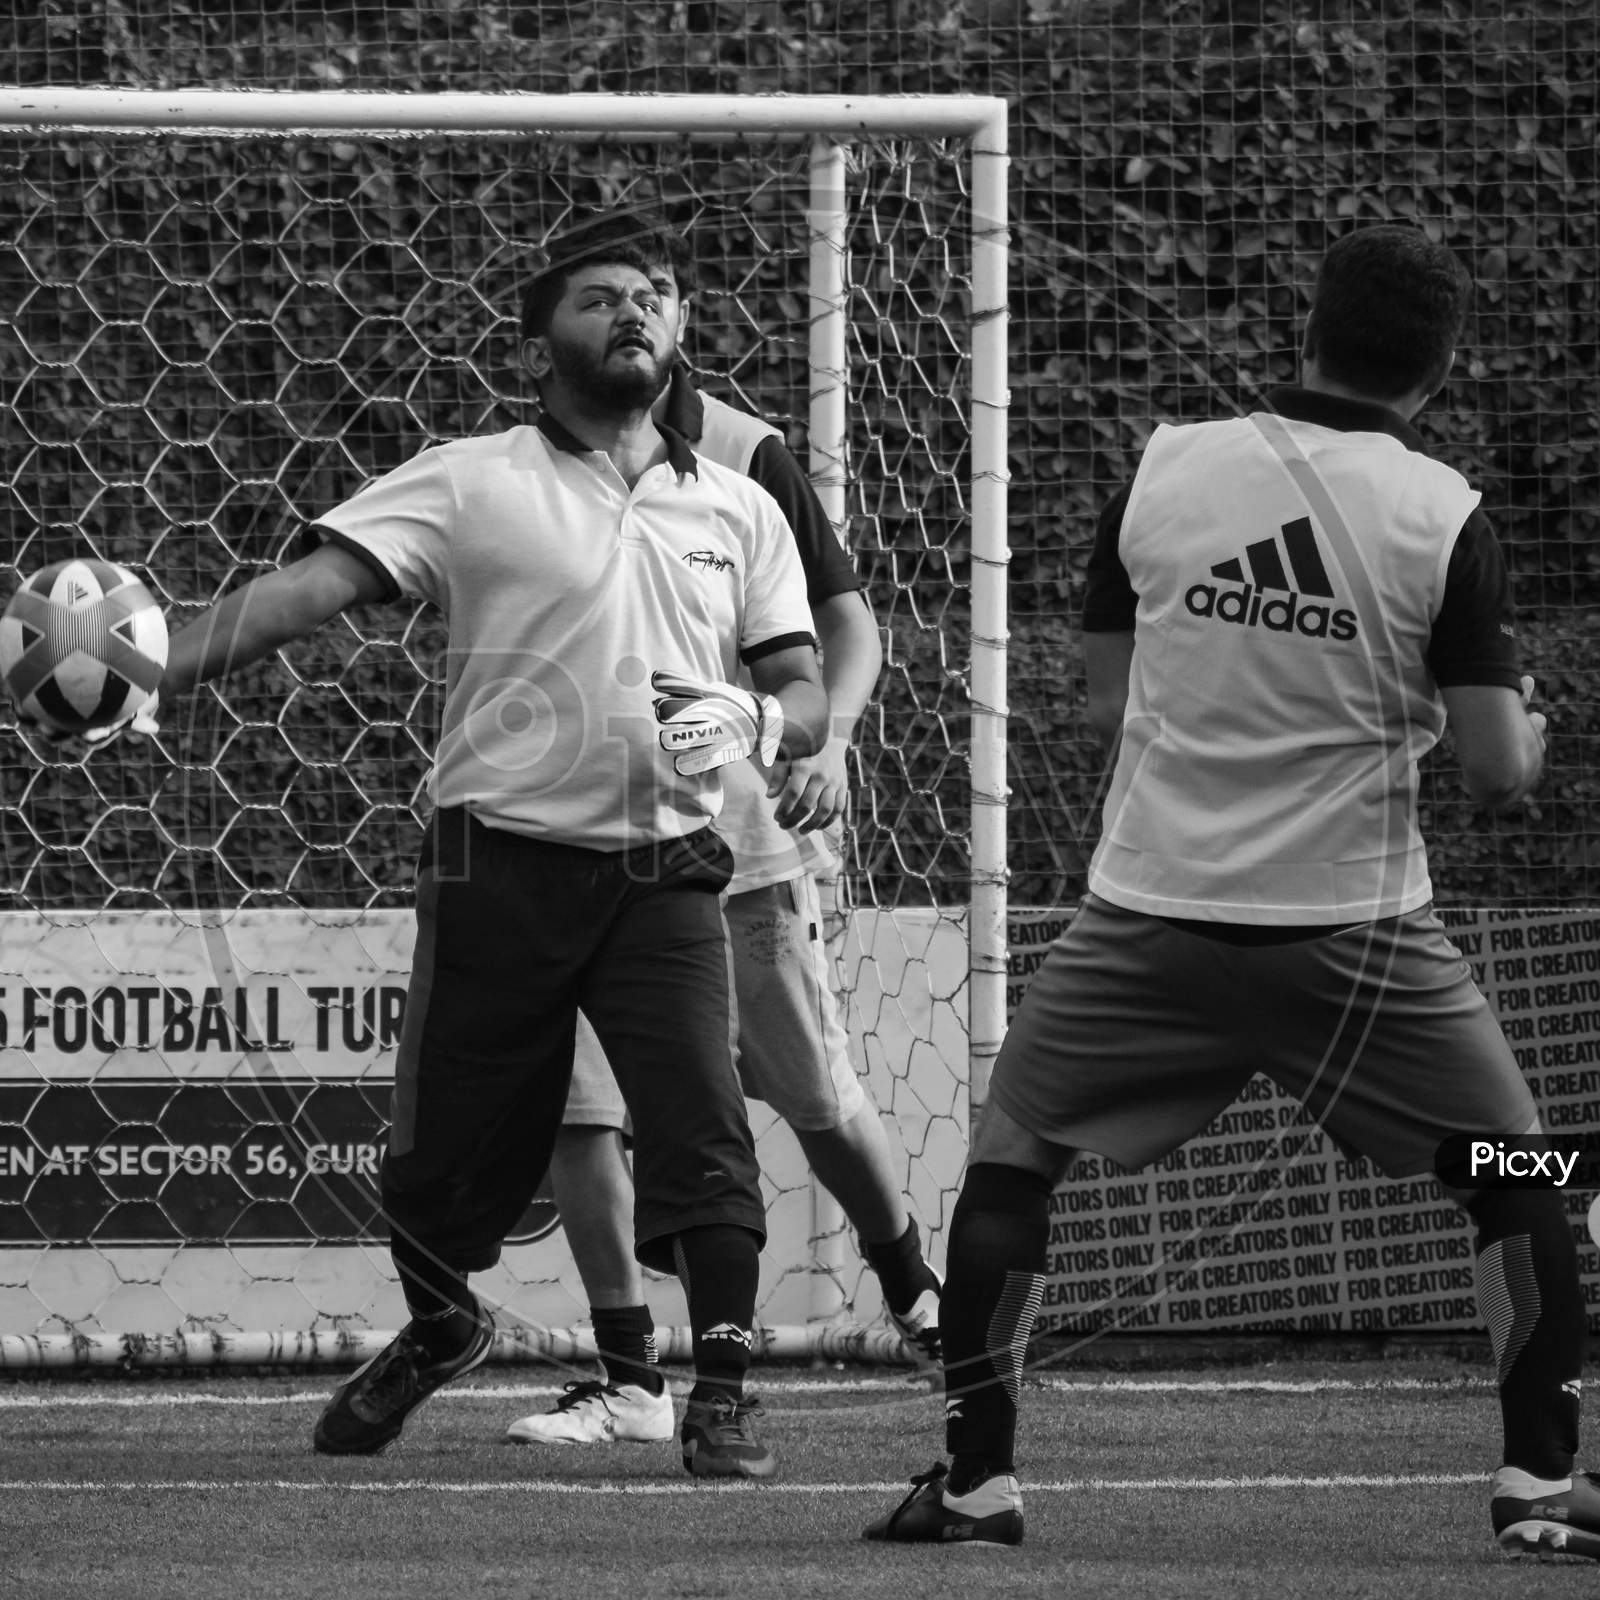 New Delhi, India - July 01 2018: Footballers Of Local Football Team During Game In Regional Derby Championship On Football Pitch. Hot Moment Of Football Match On Grass Field Stadium - Black And White